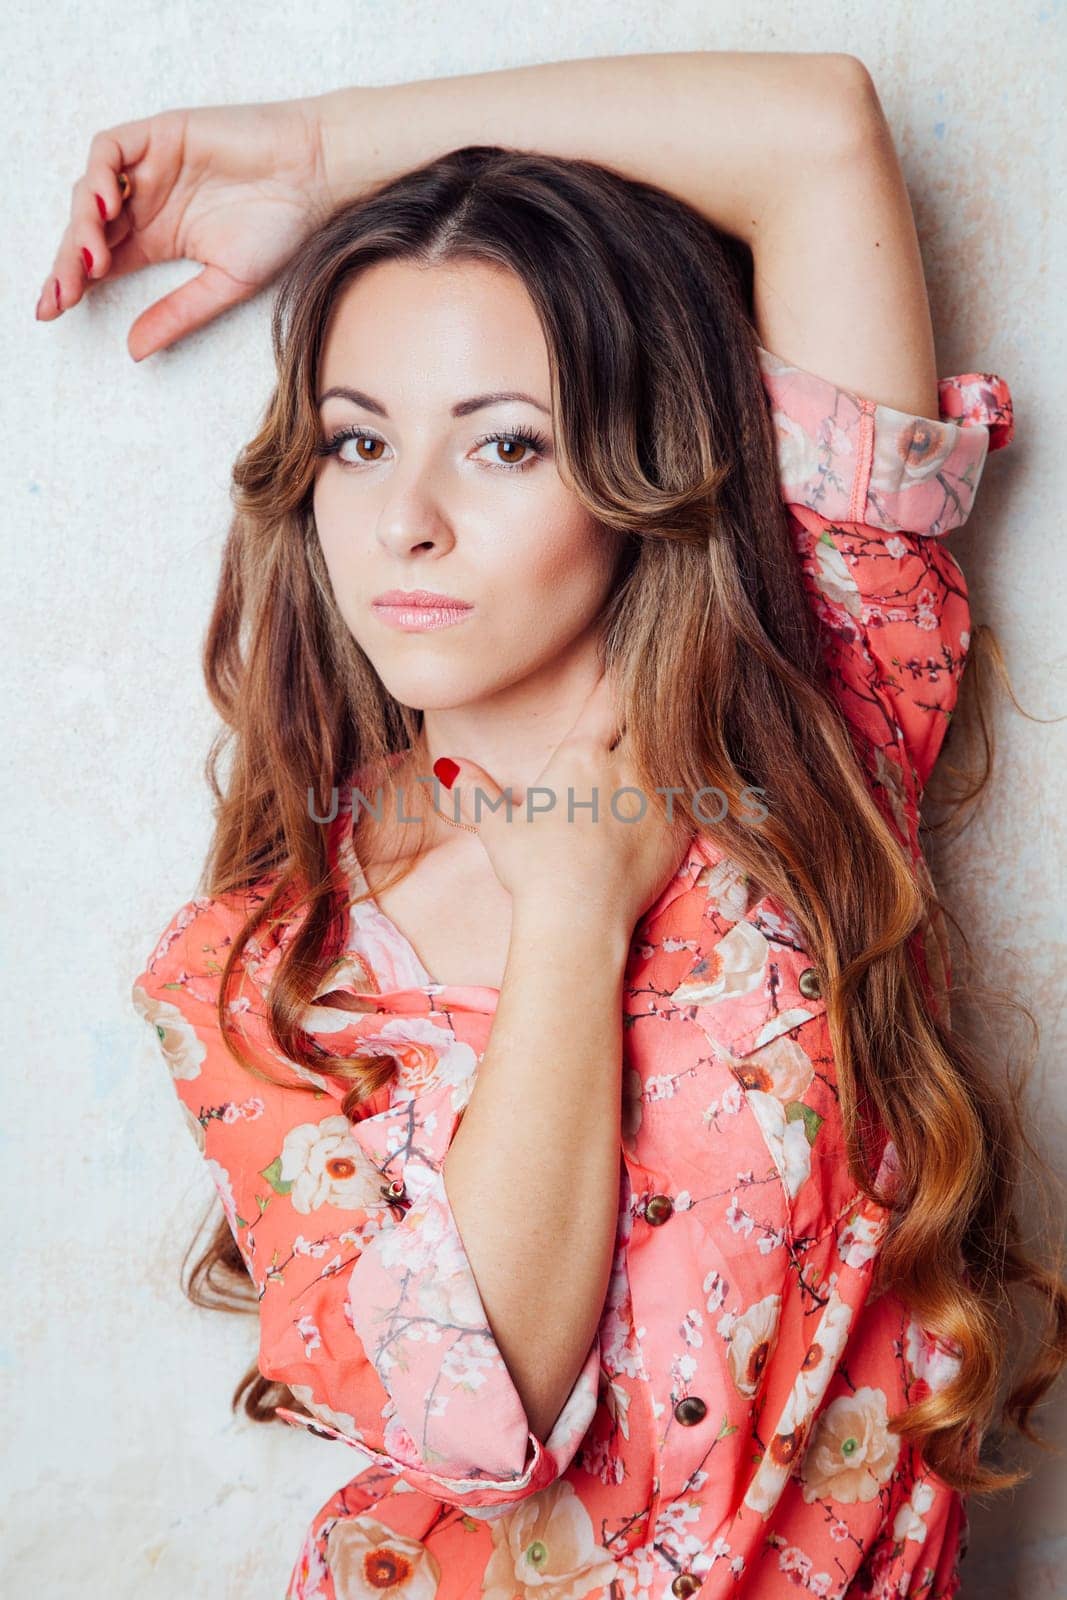 girl in pink business suit posing smiling by Simakov